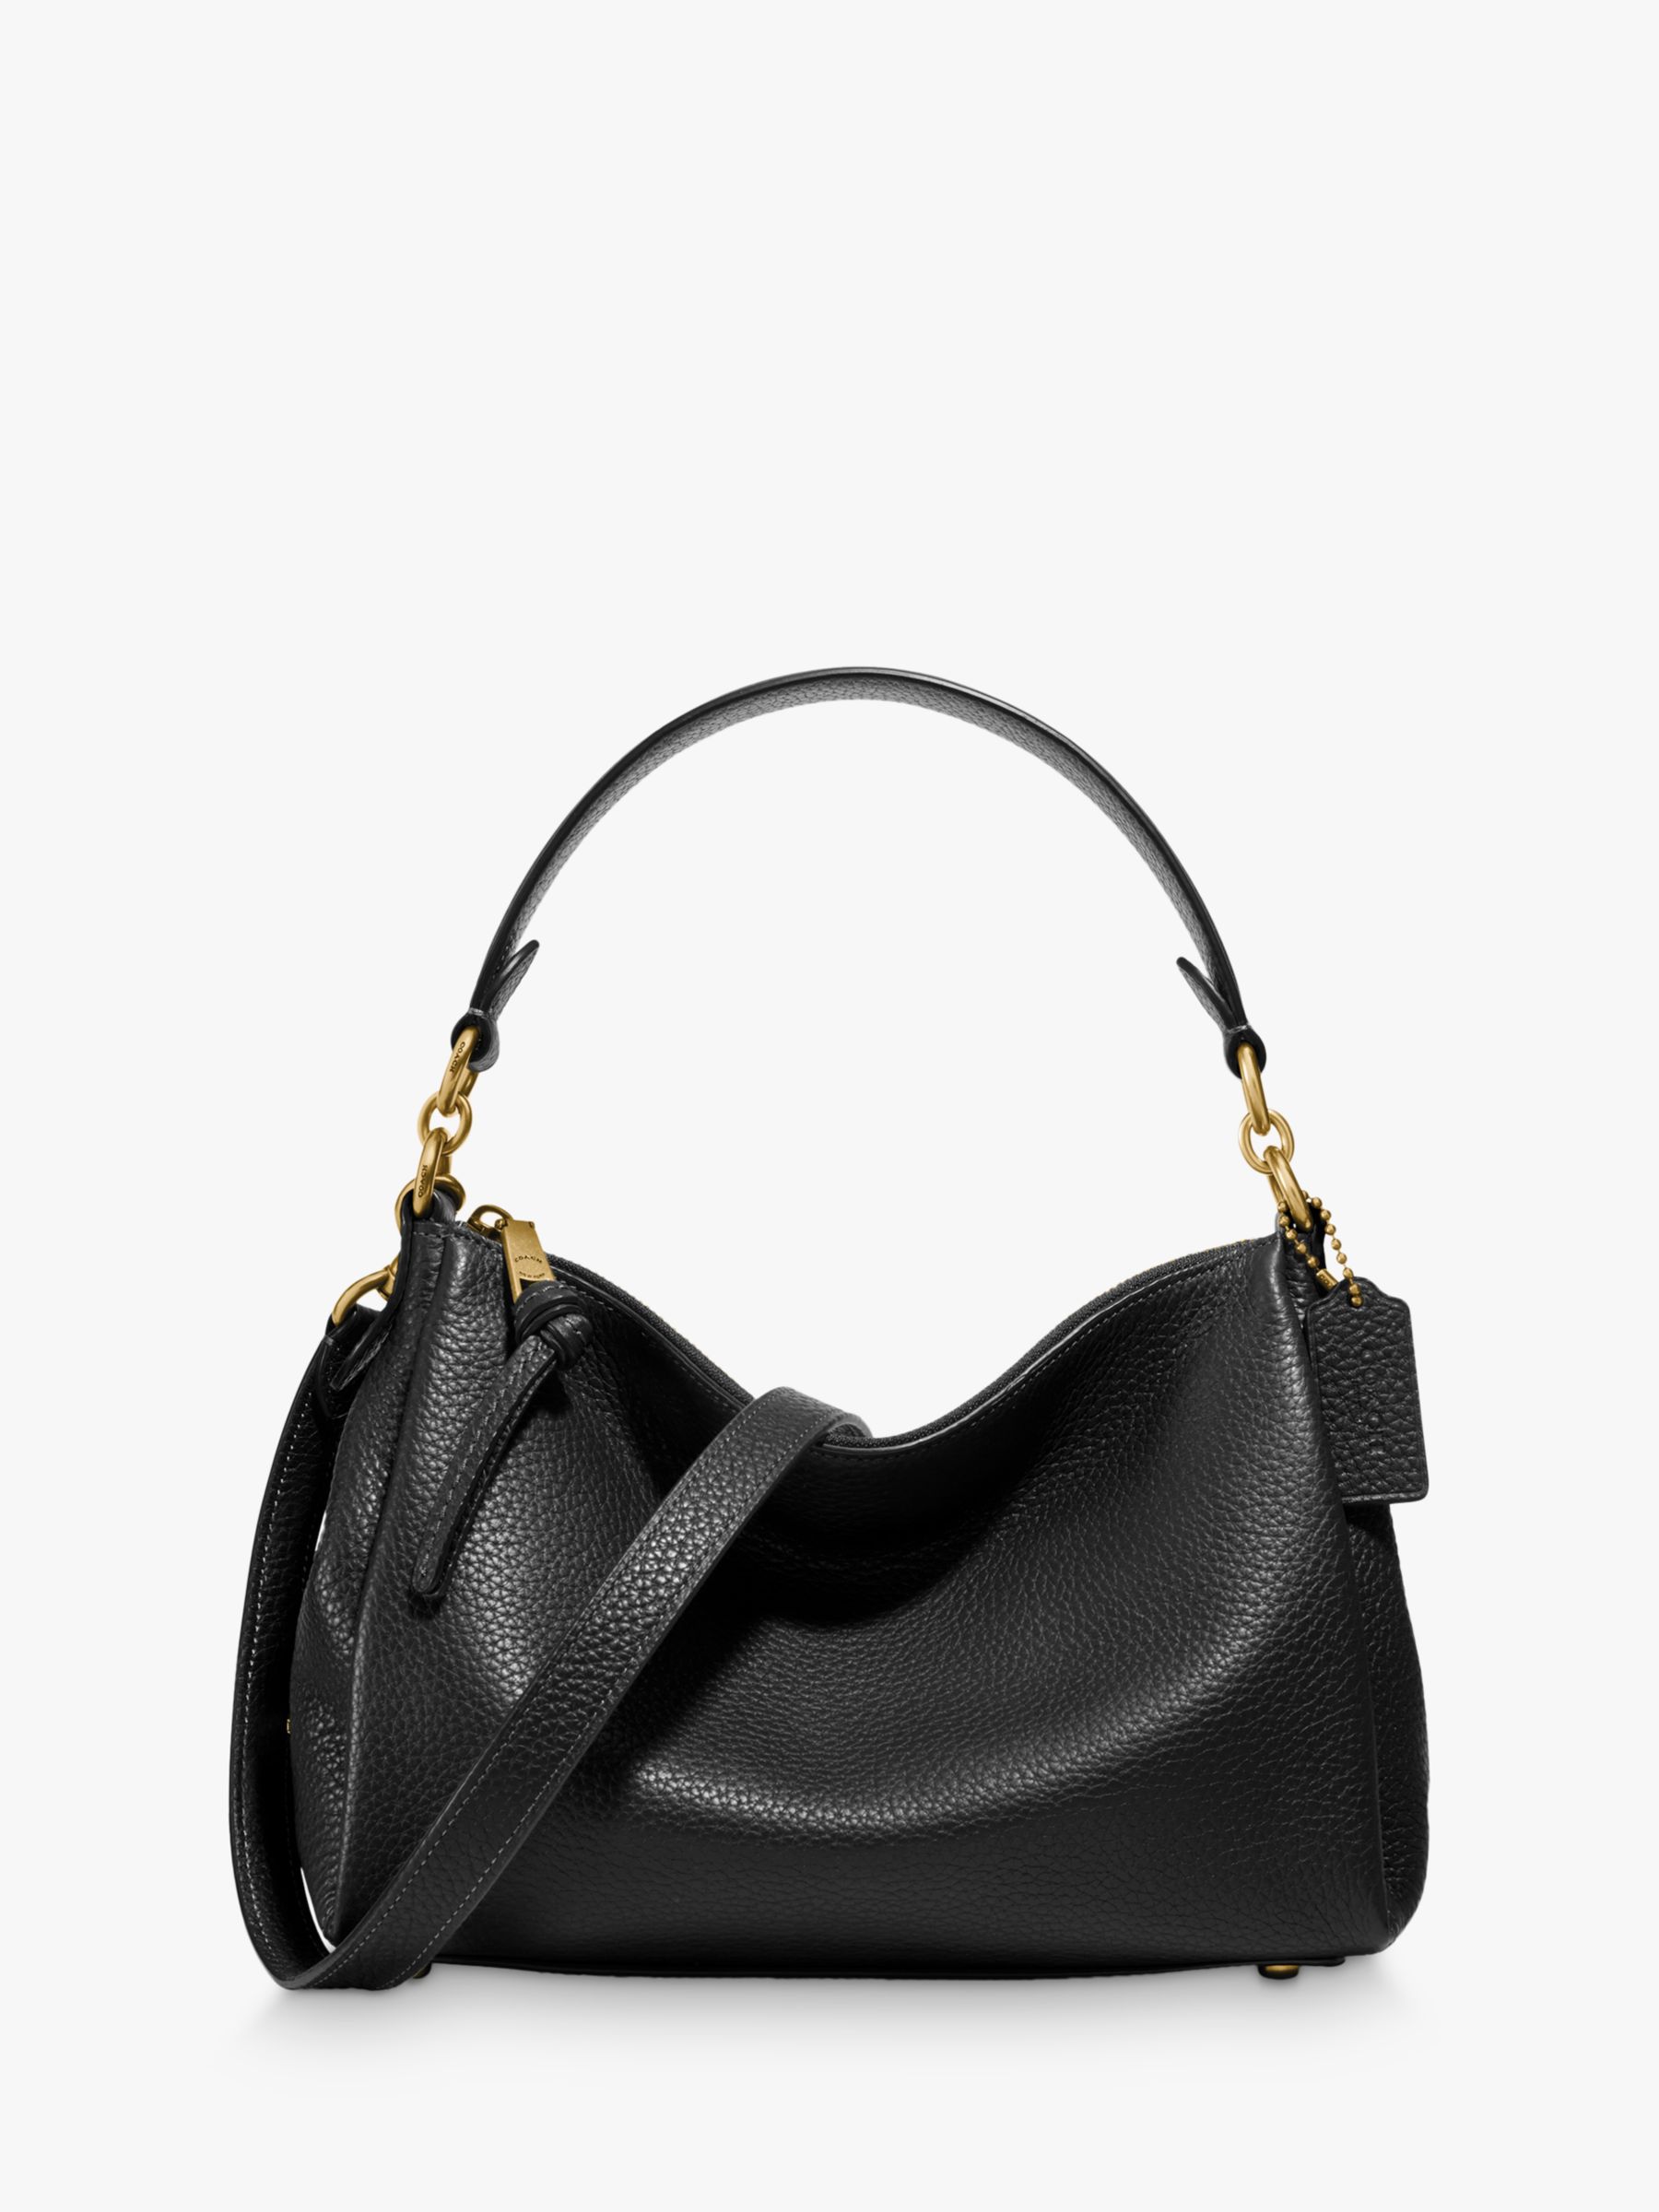 Coach Shay Leather Cross Body Bag, Black at John Lewis & Partners